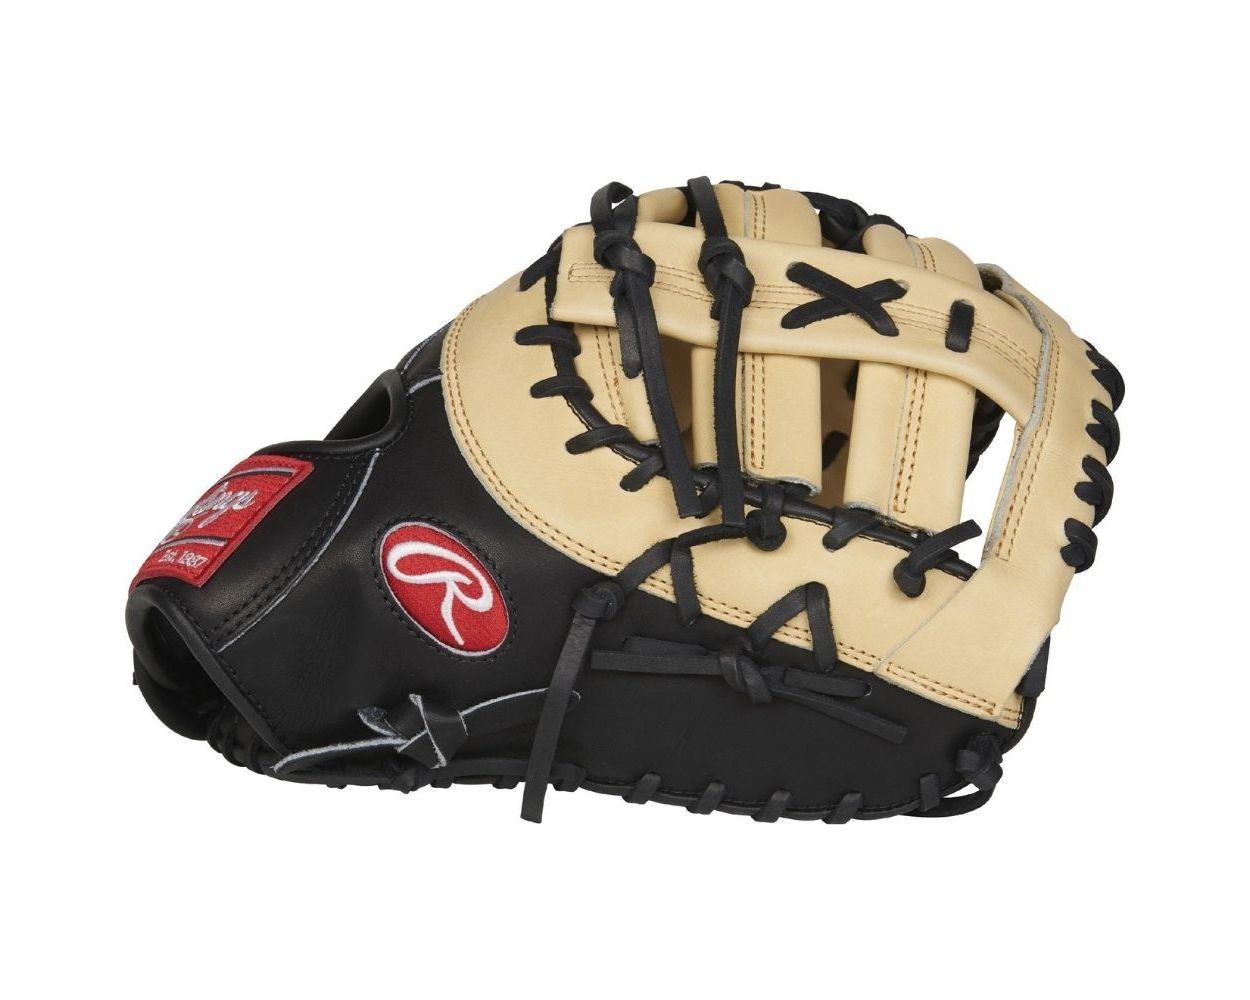 Rawlings First Base Glove 13 Heart of the Hide: PRODCTCB